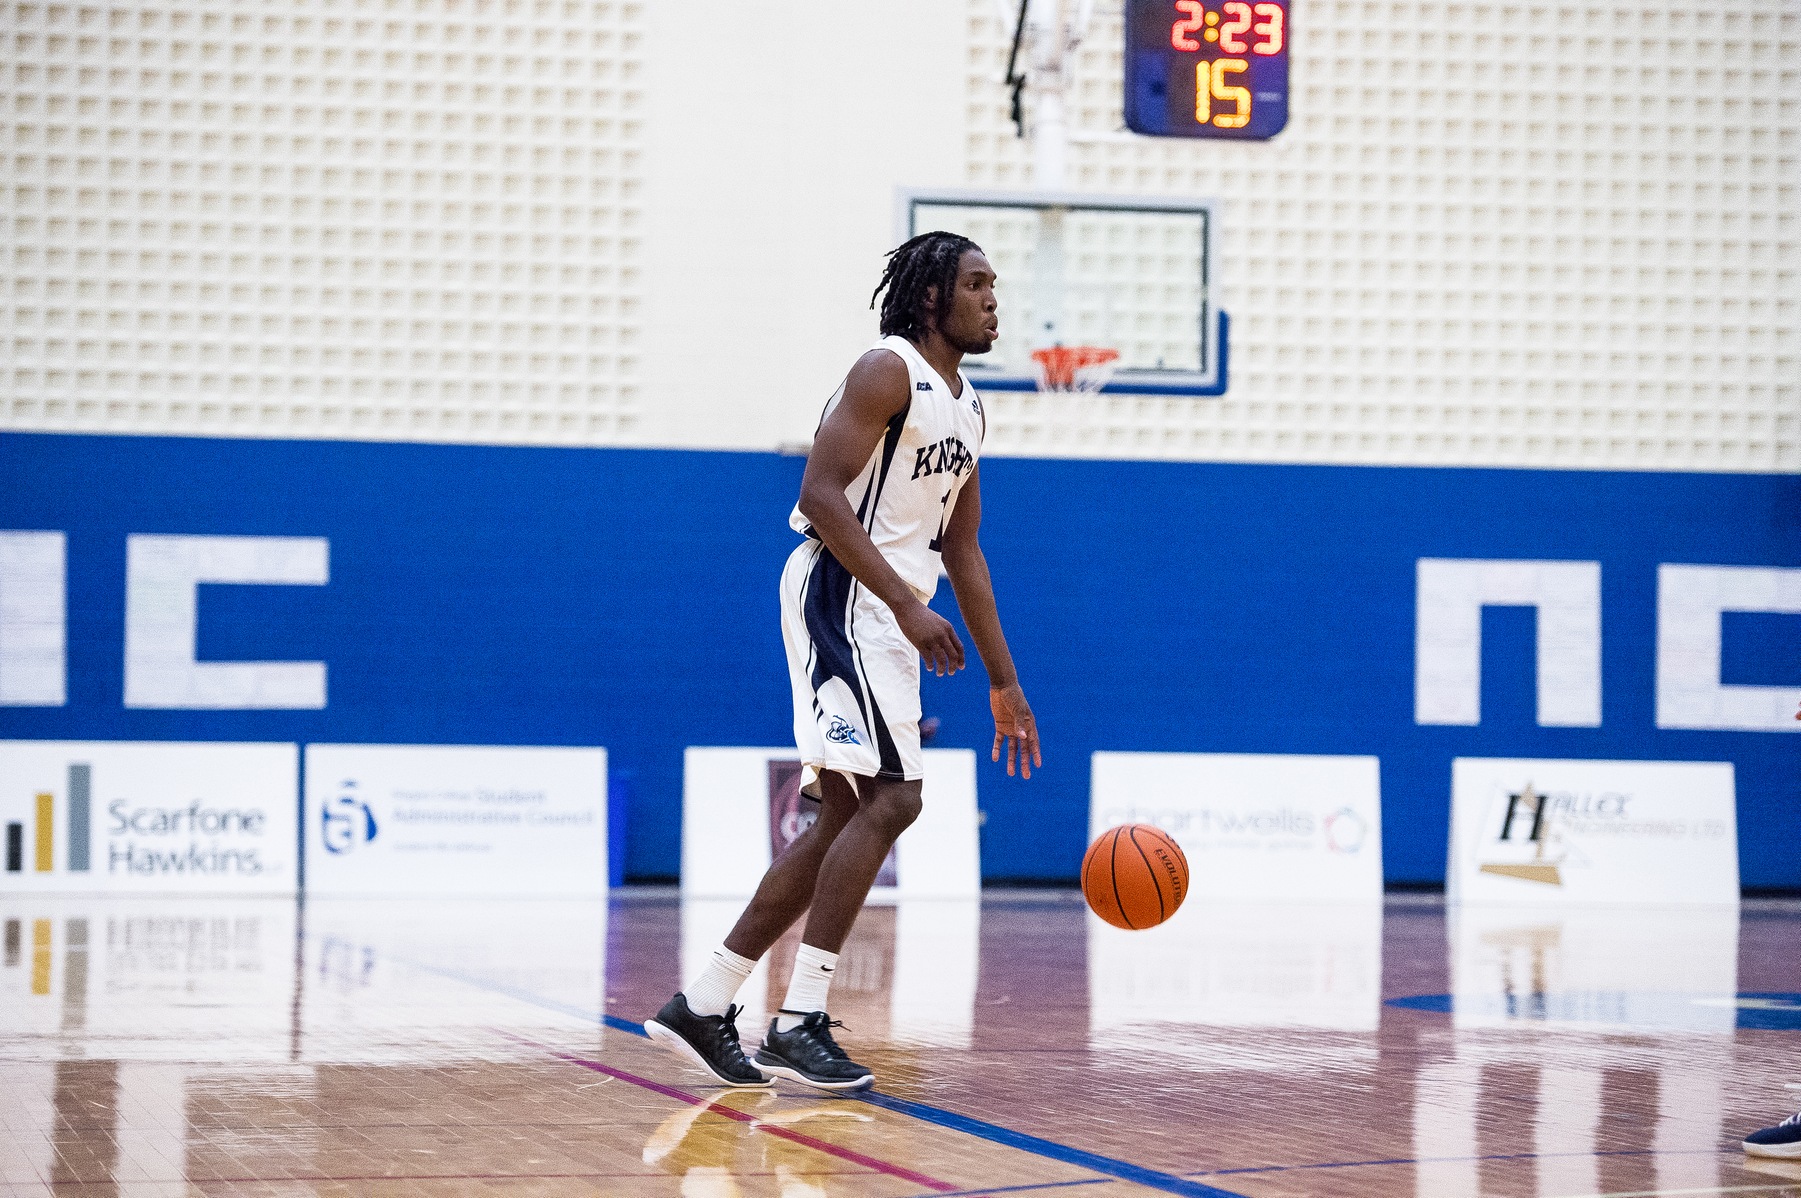 RECAP: Knights drop to 10-6 with loss to Humber